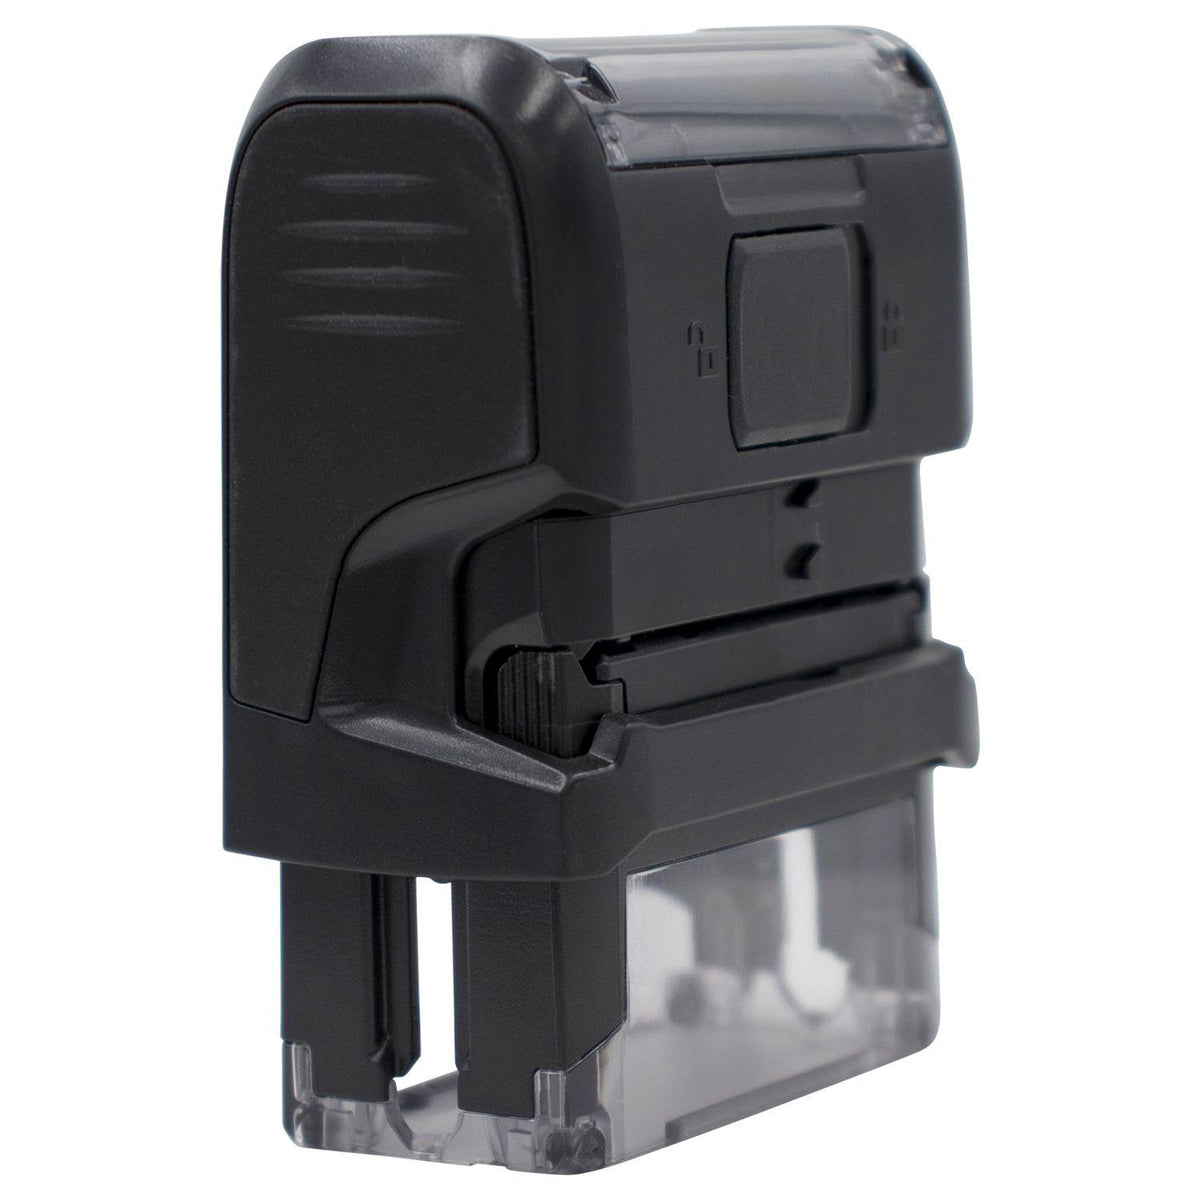 Self-Inking File Copy with Folder Stamp - Engineer Seal Stamps - Brand_Trodat, Impression Size_Small, Stamp Type_Self-Inking Stamp, Type of Use_General, Type of Use_Office